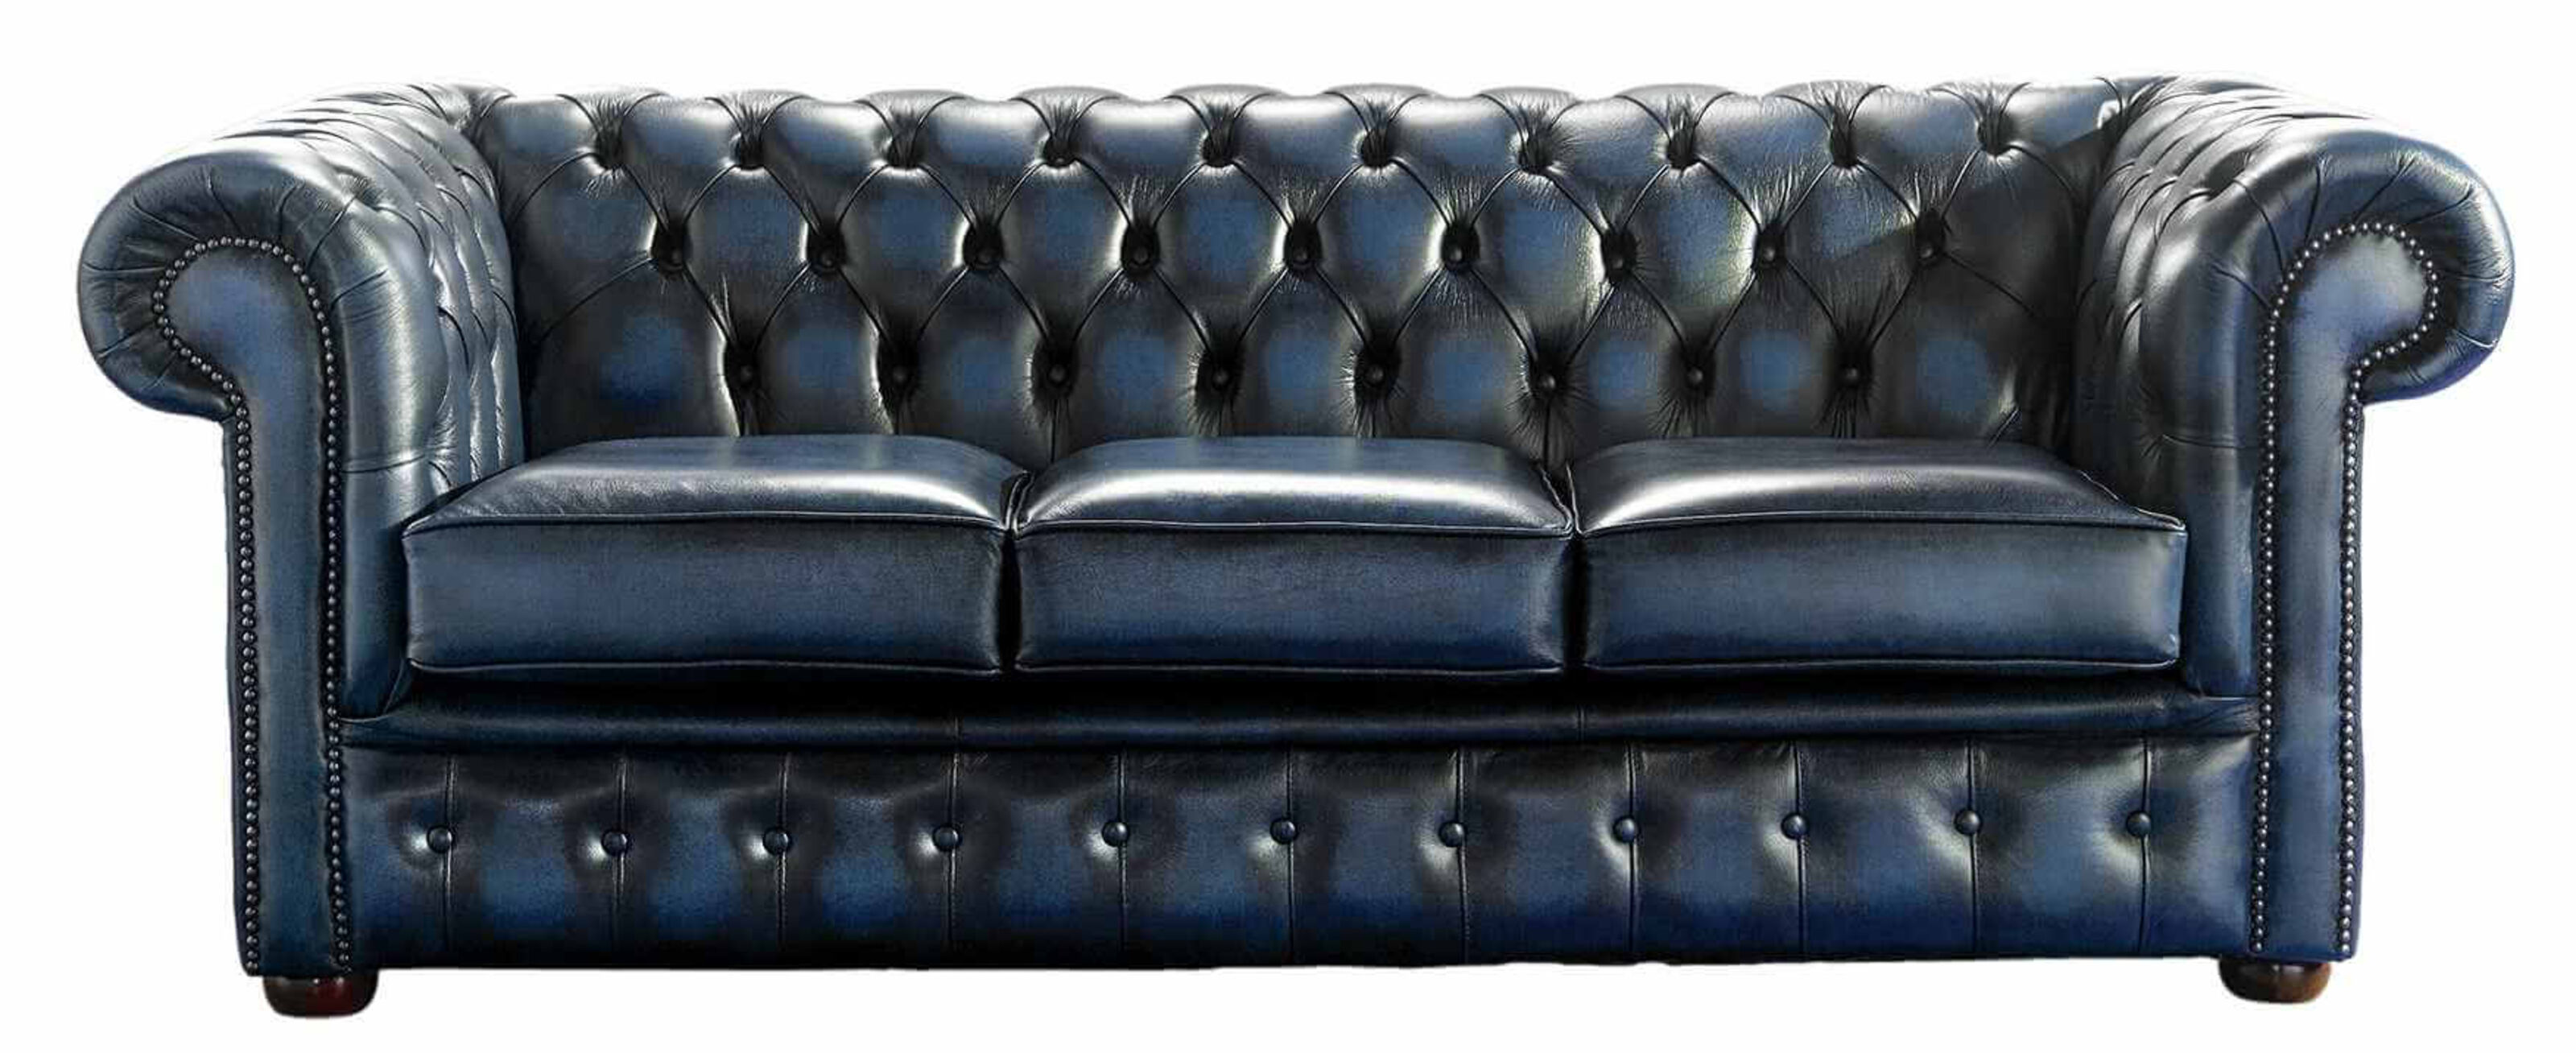 Crafting Artistry: The World of Chesterfield Sofa Manufacturing  %Post Title